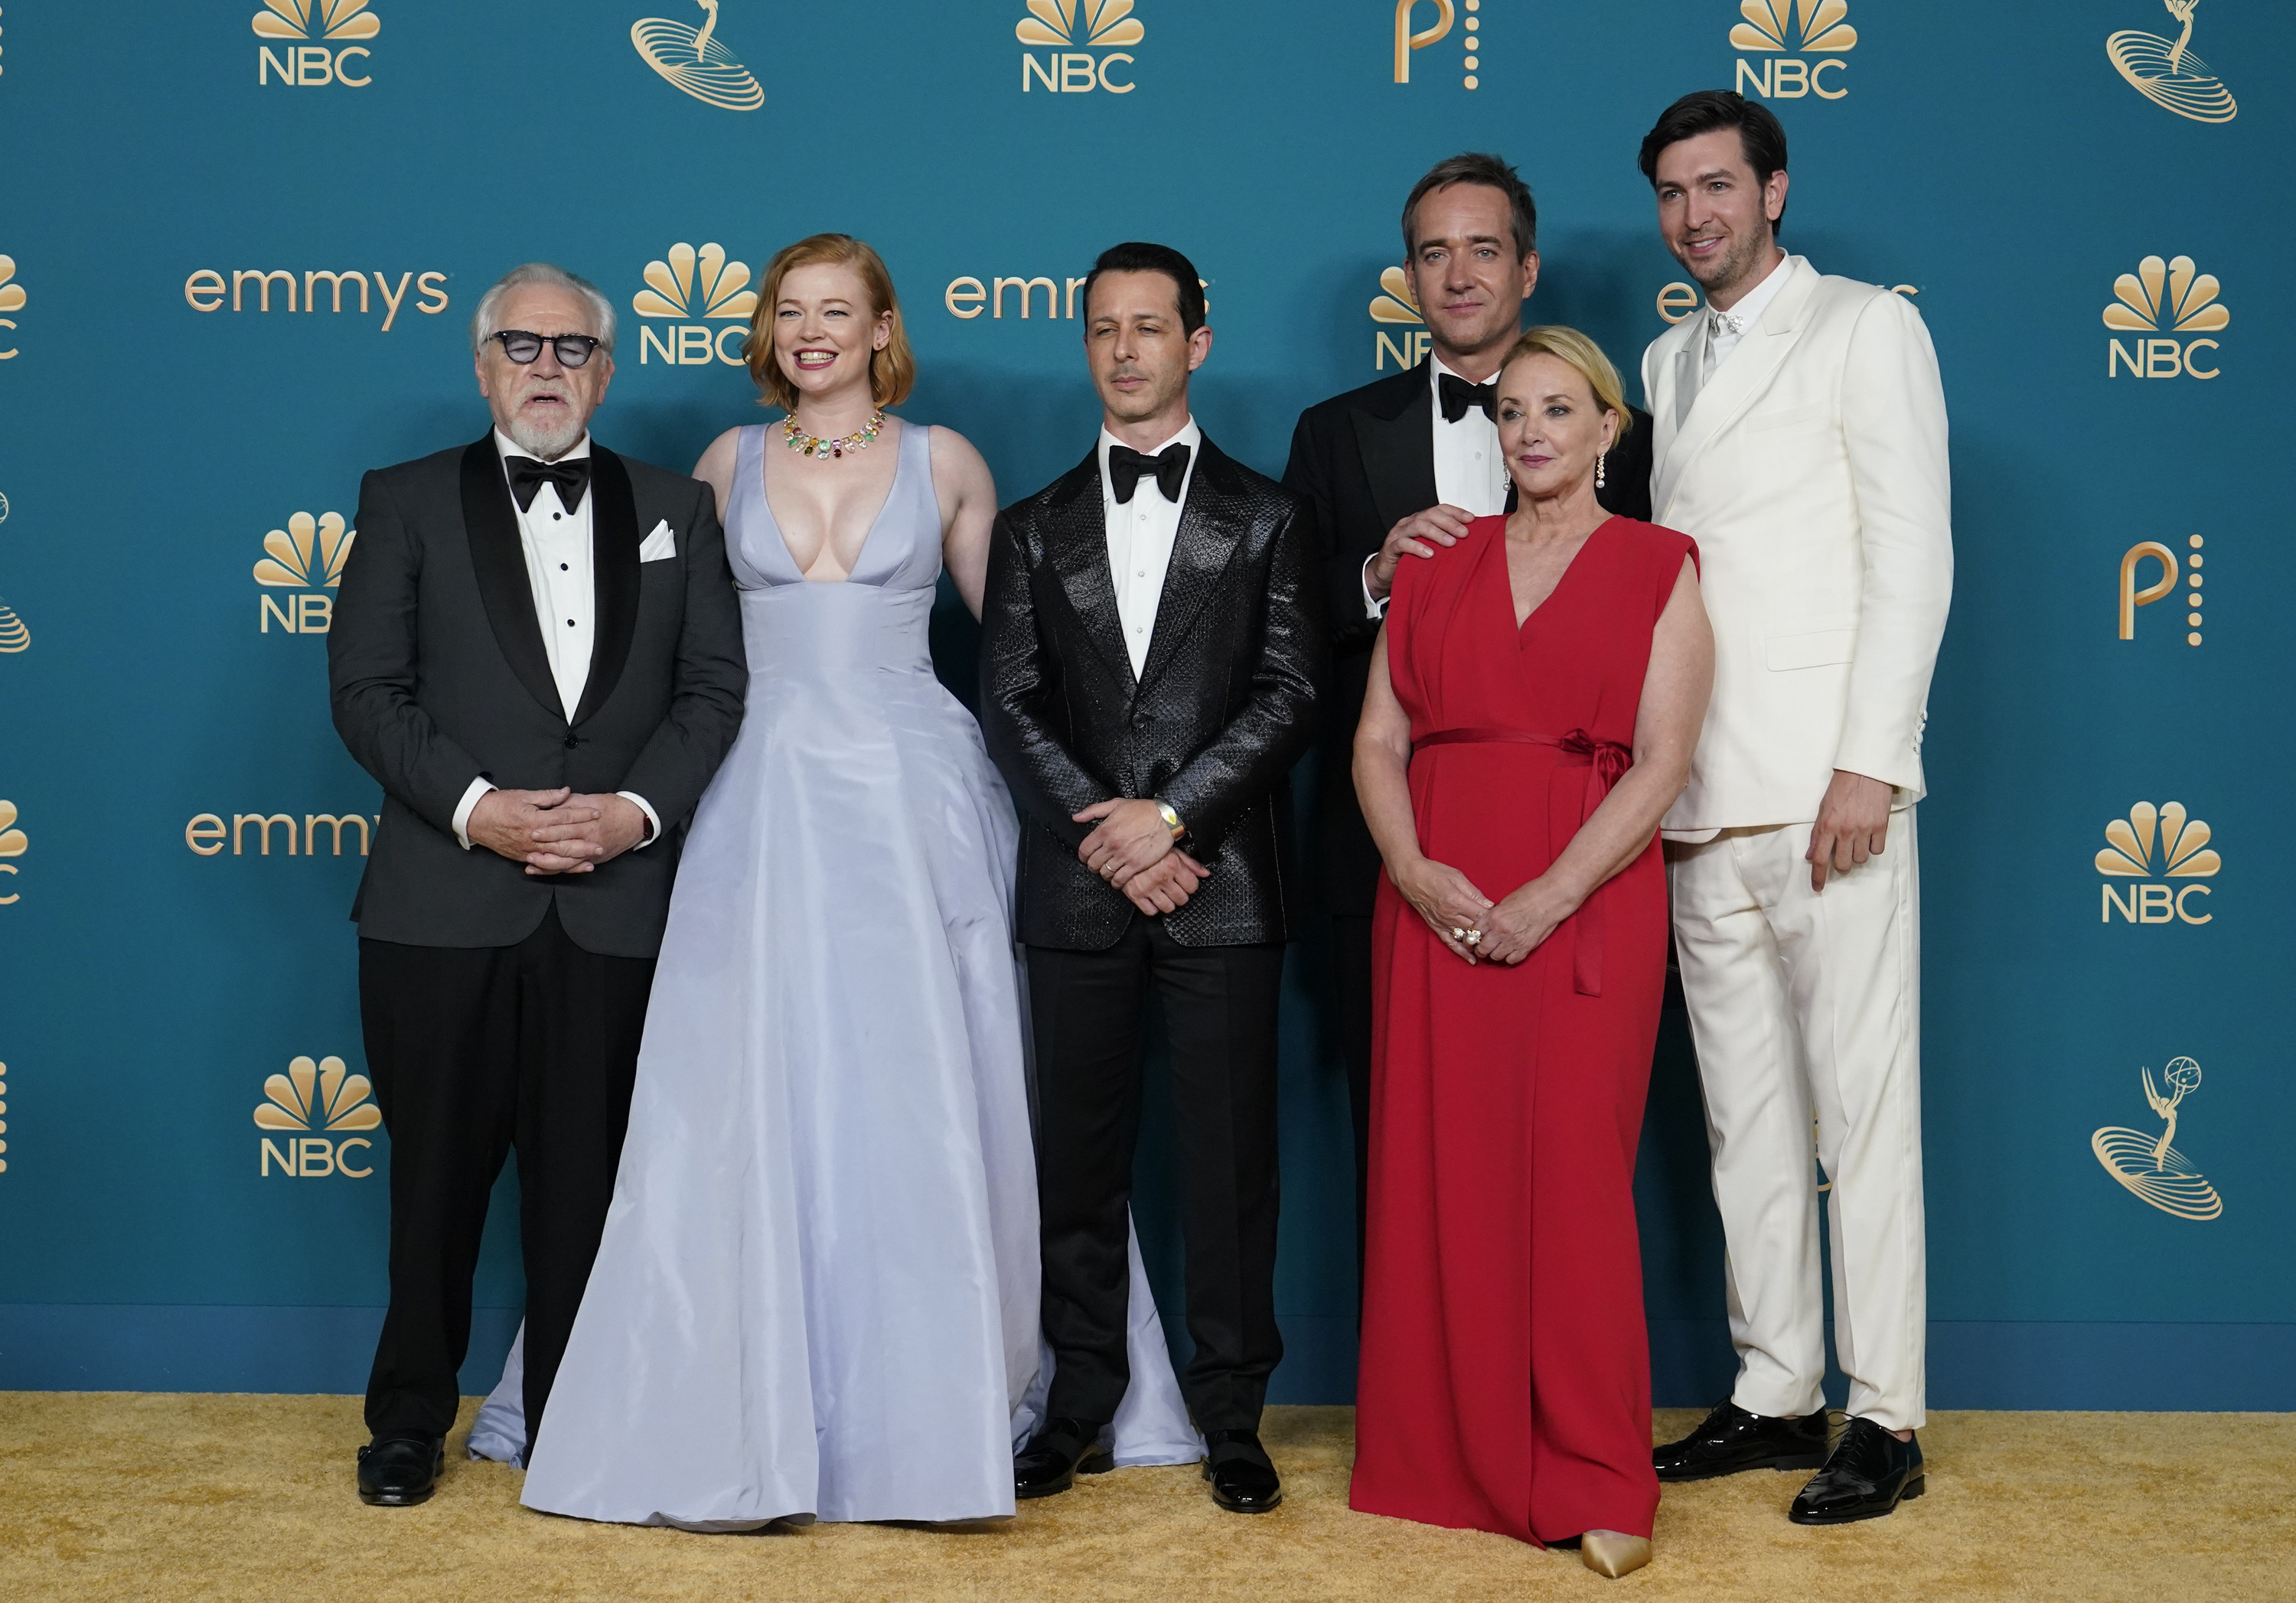 Succession cast members (from left) Brian Cox, Sarah Snook, Jeremy Strong, Matthew Macfadyen, J. Smith-Cameron, and Nicholas Braun. The series won best drama series and Macfadyen best supporting actor in a drama series at the Emmys in Los Angeles on Monday. Photo: AP